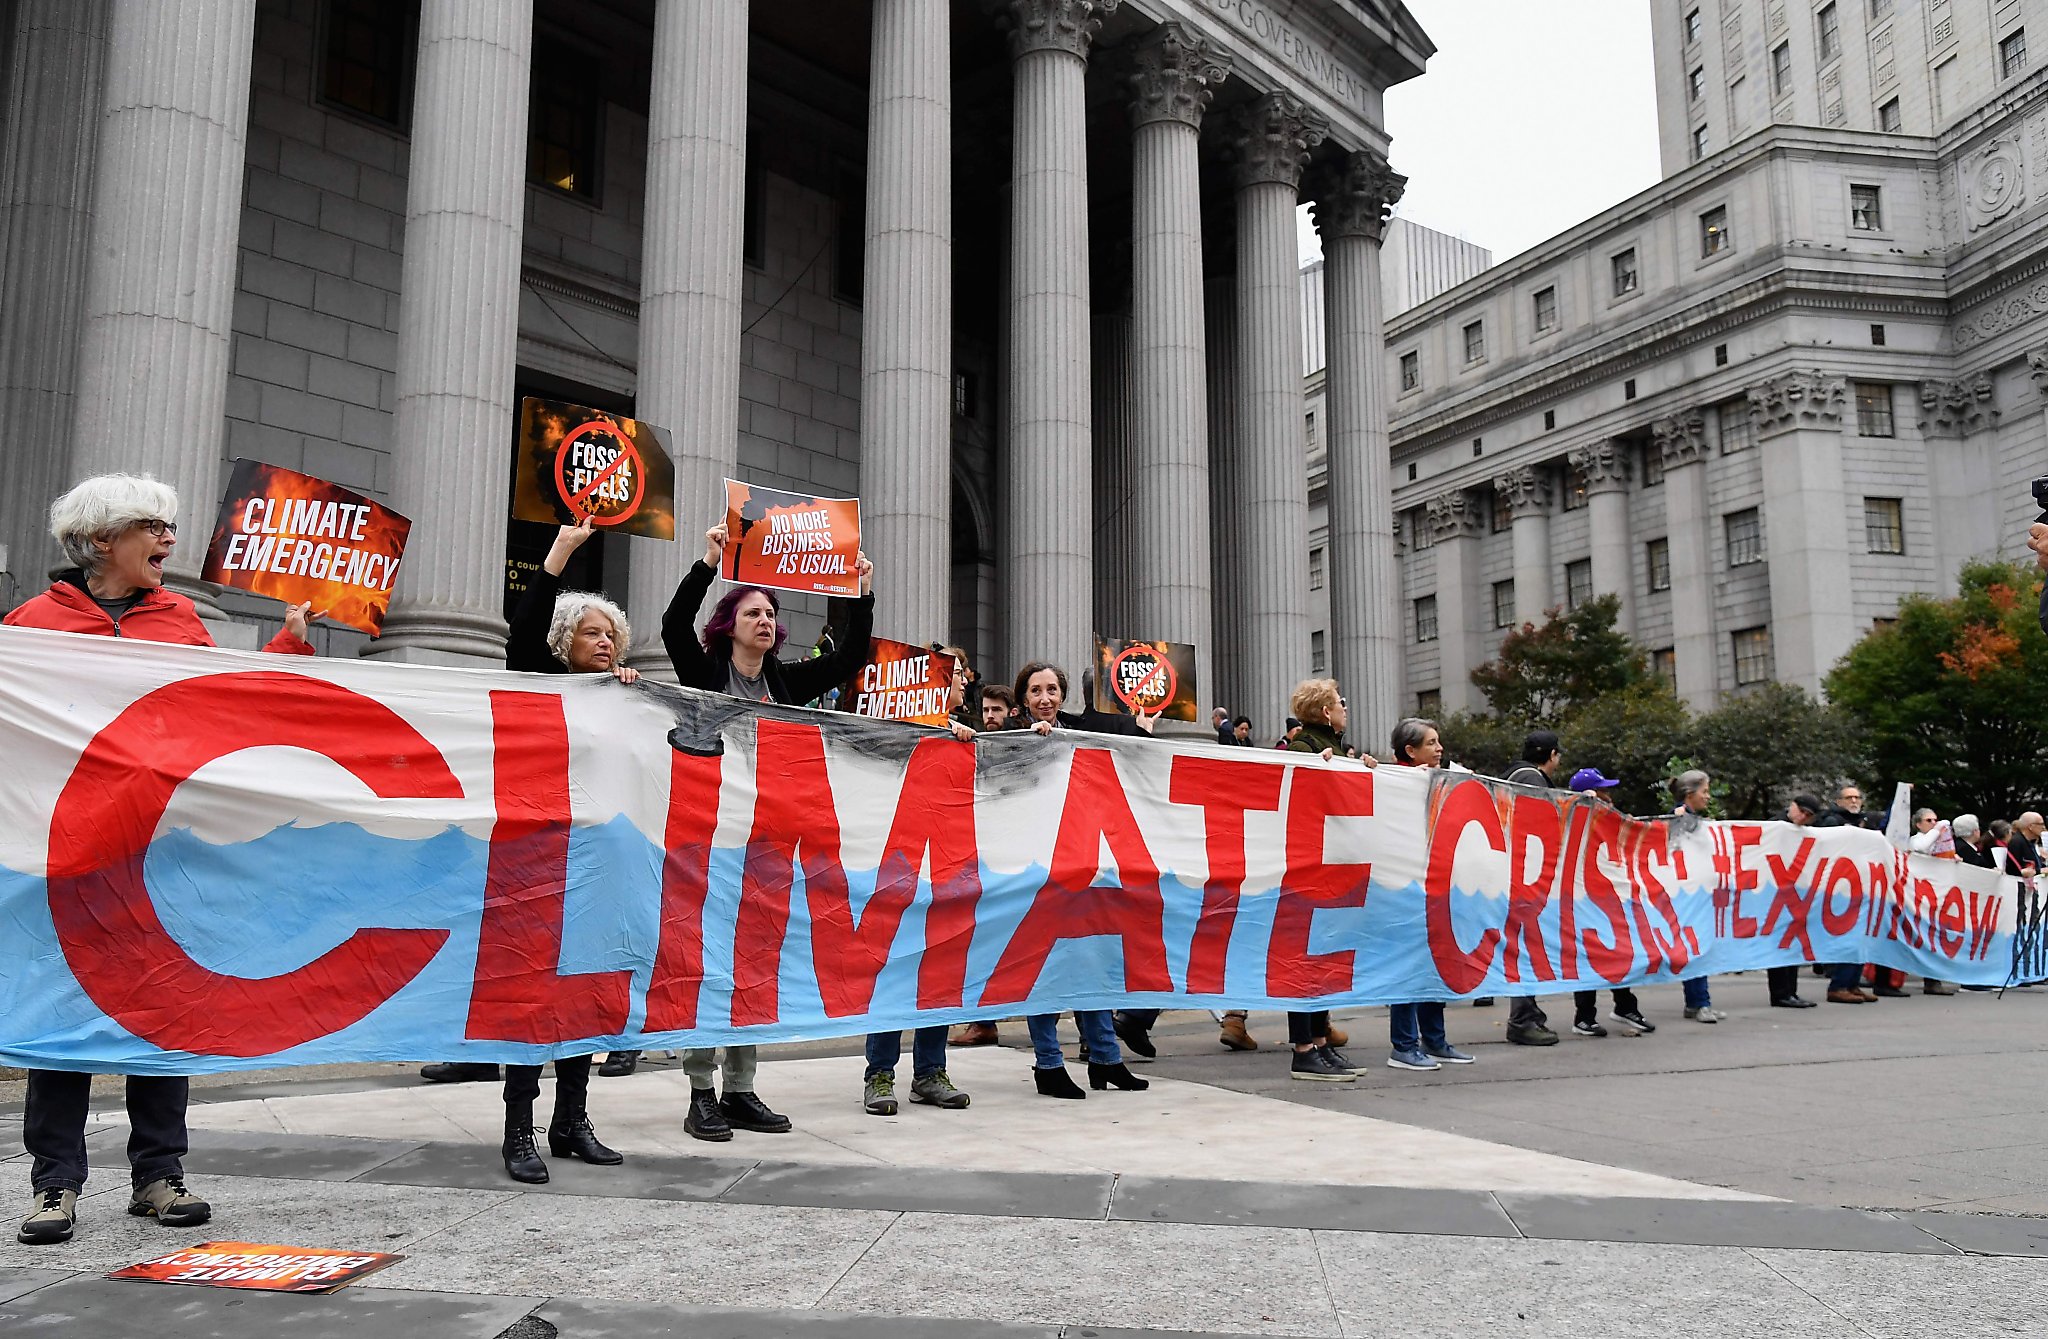 Penalties for climate activists under review